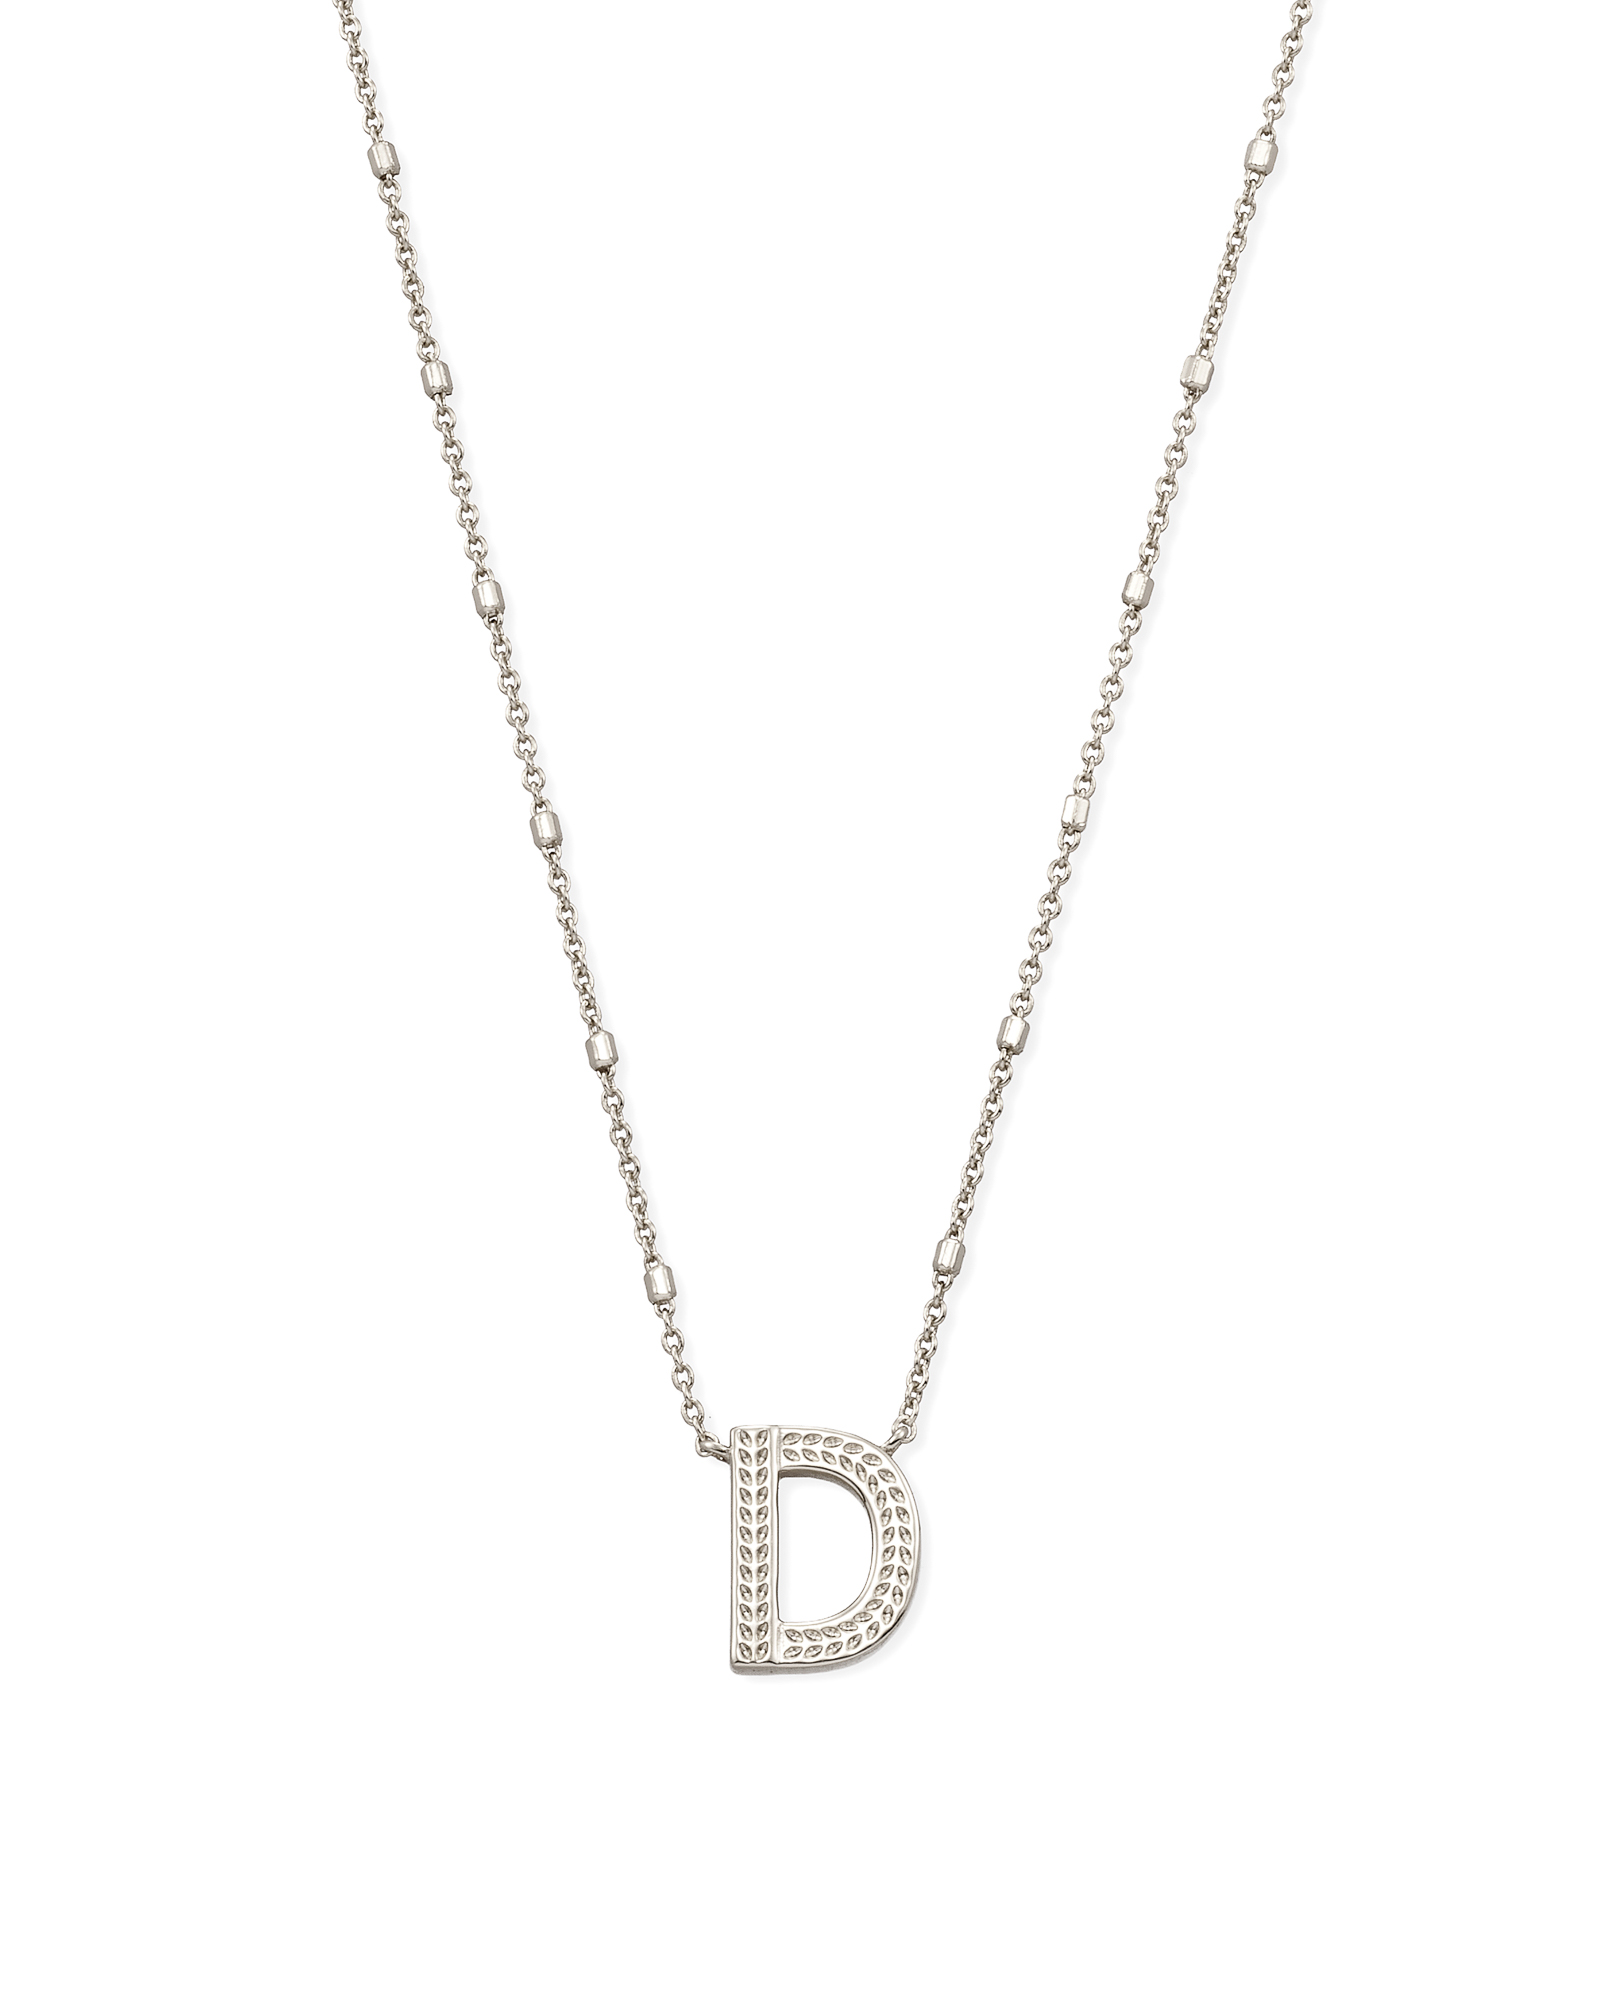 Hermes 'Chain d'Ancre' Vintage Sterling Silver 32